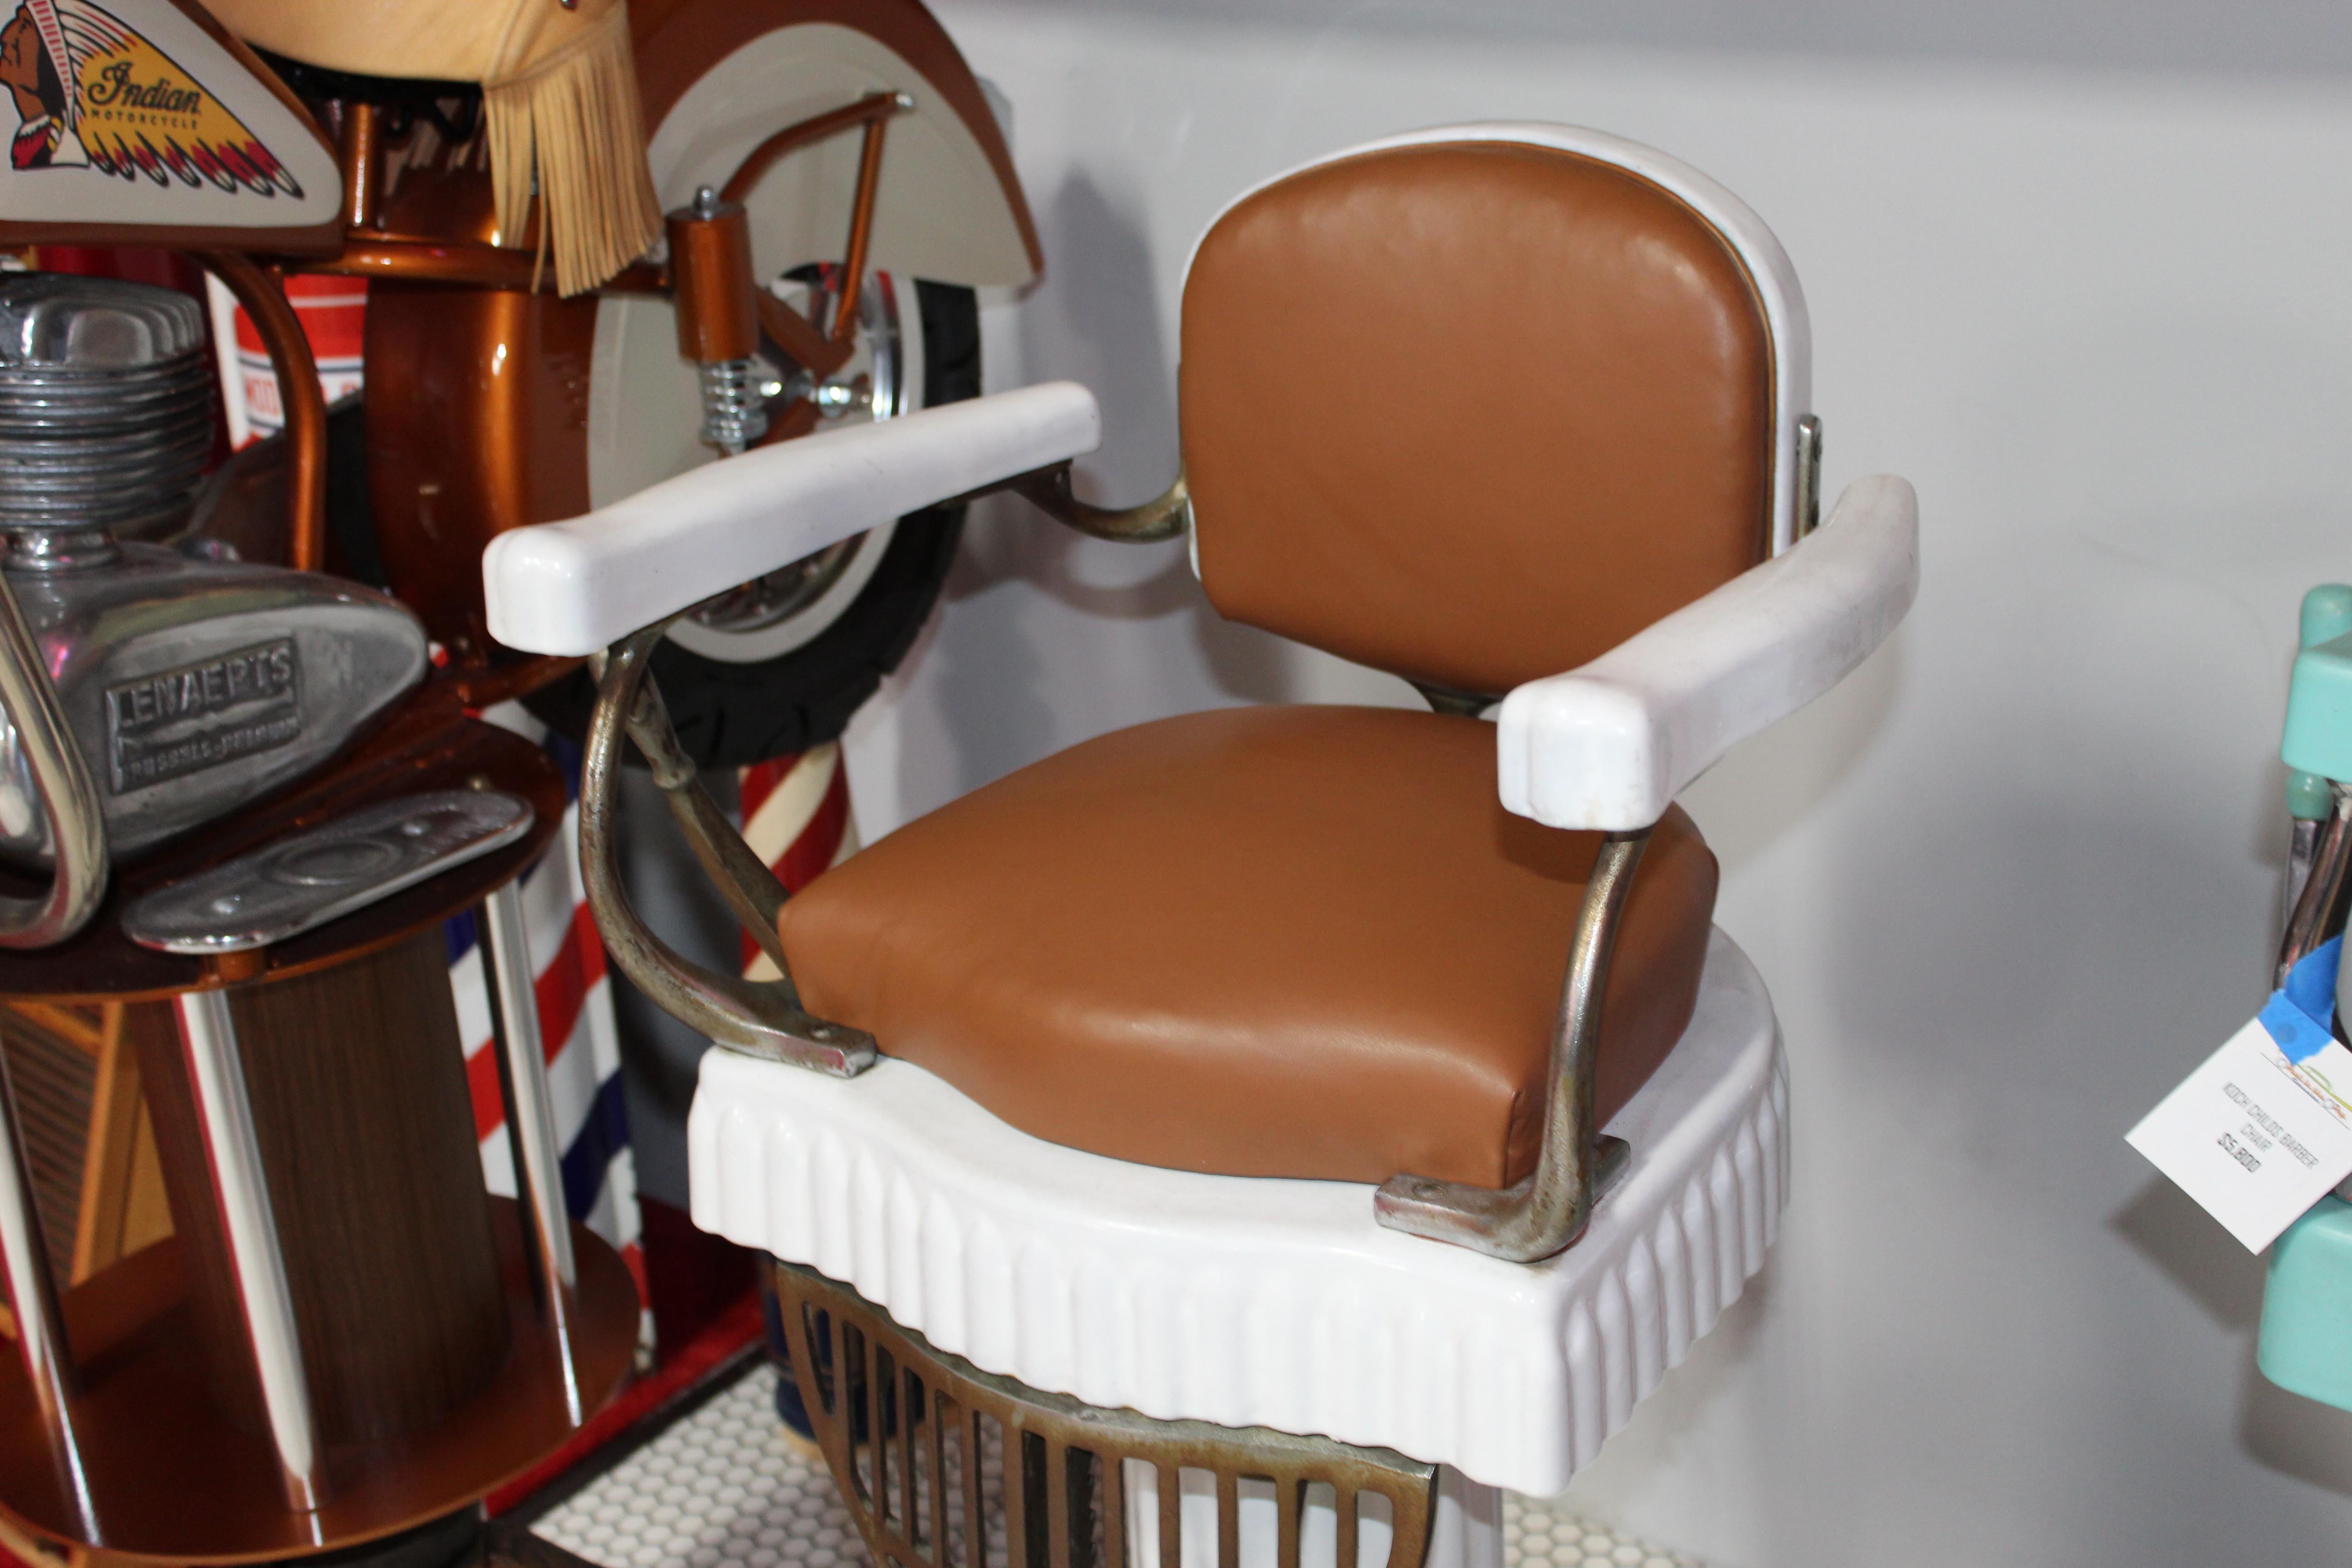 Ribbed & Flutted porcelain base. Previously semi-restored child’s barber chair. Looks like the leather was re done but the chair is still original. Porcelain shows its age / has patina look land some small nice but over all very clean chair. Koken